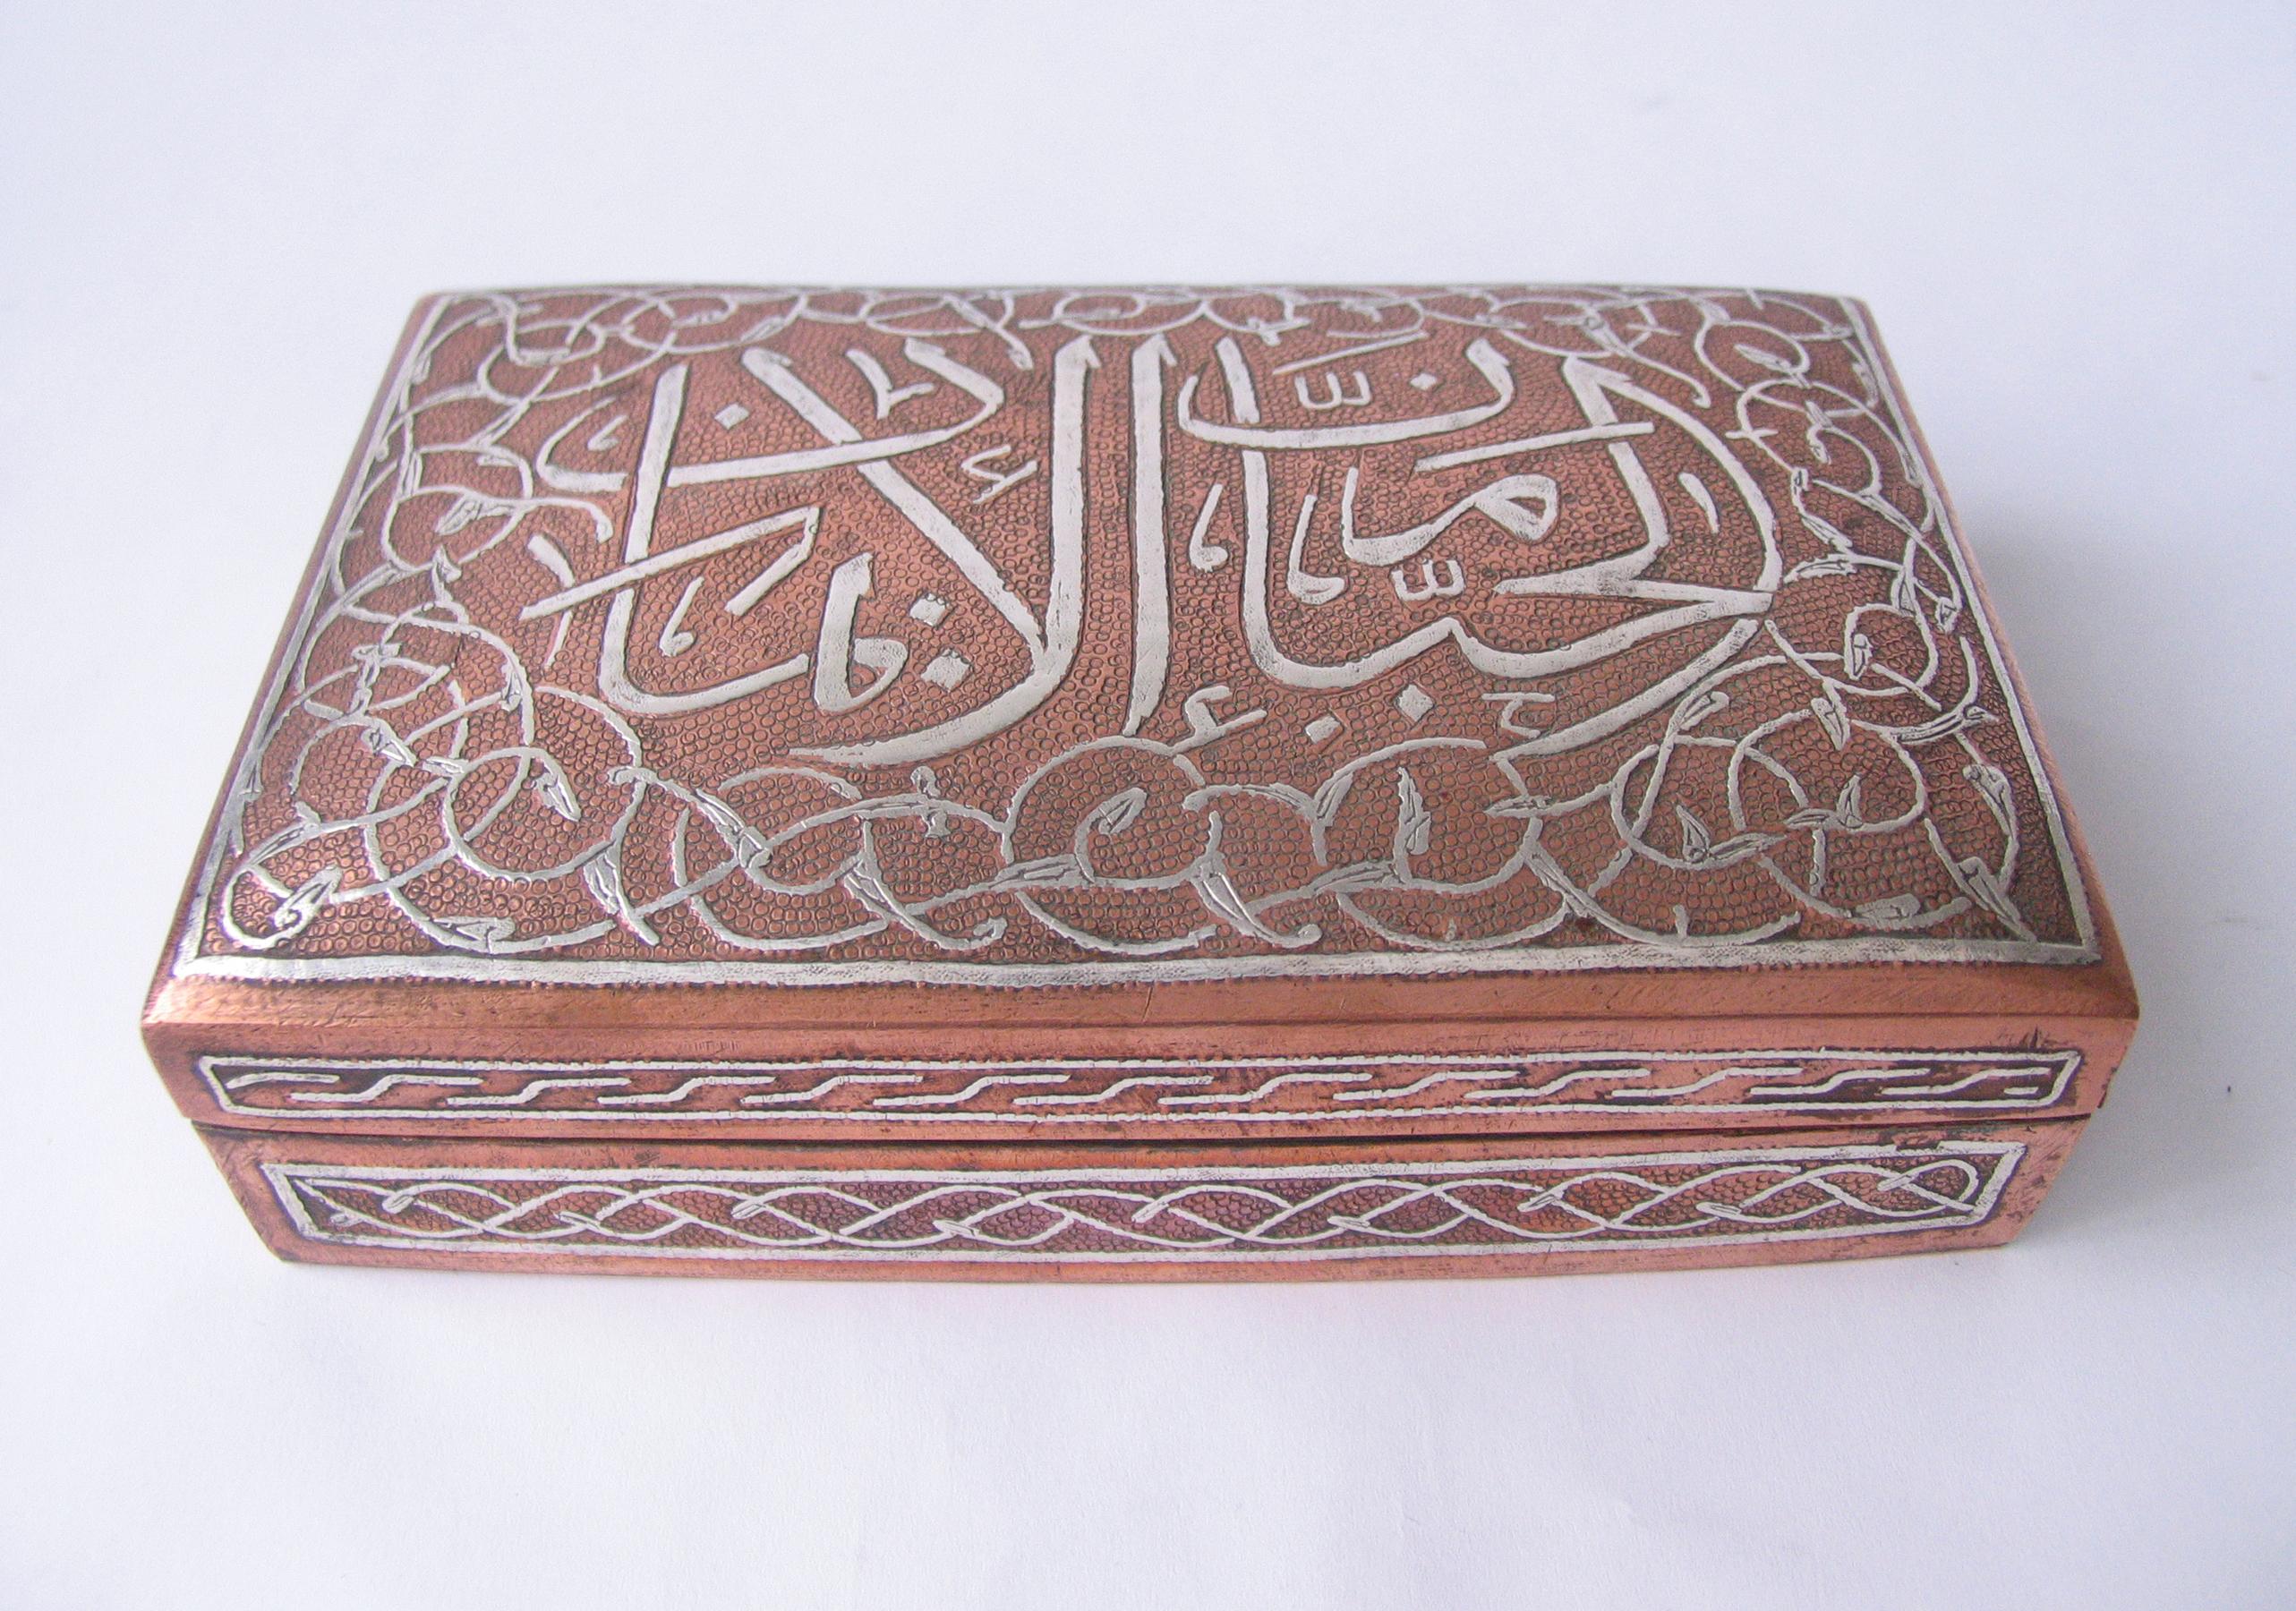 Islamic silver calligraphy inlay damascened copper jewelry box with hinged lid and wood interior.
Hand hammered copper and silver Inlay work done by craftsman in the old Cairo market, Egypt.
This is also called the Mamluk revival style, or Cairoware.